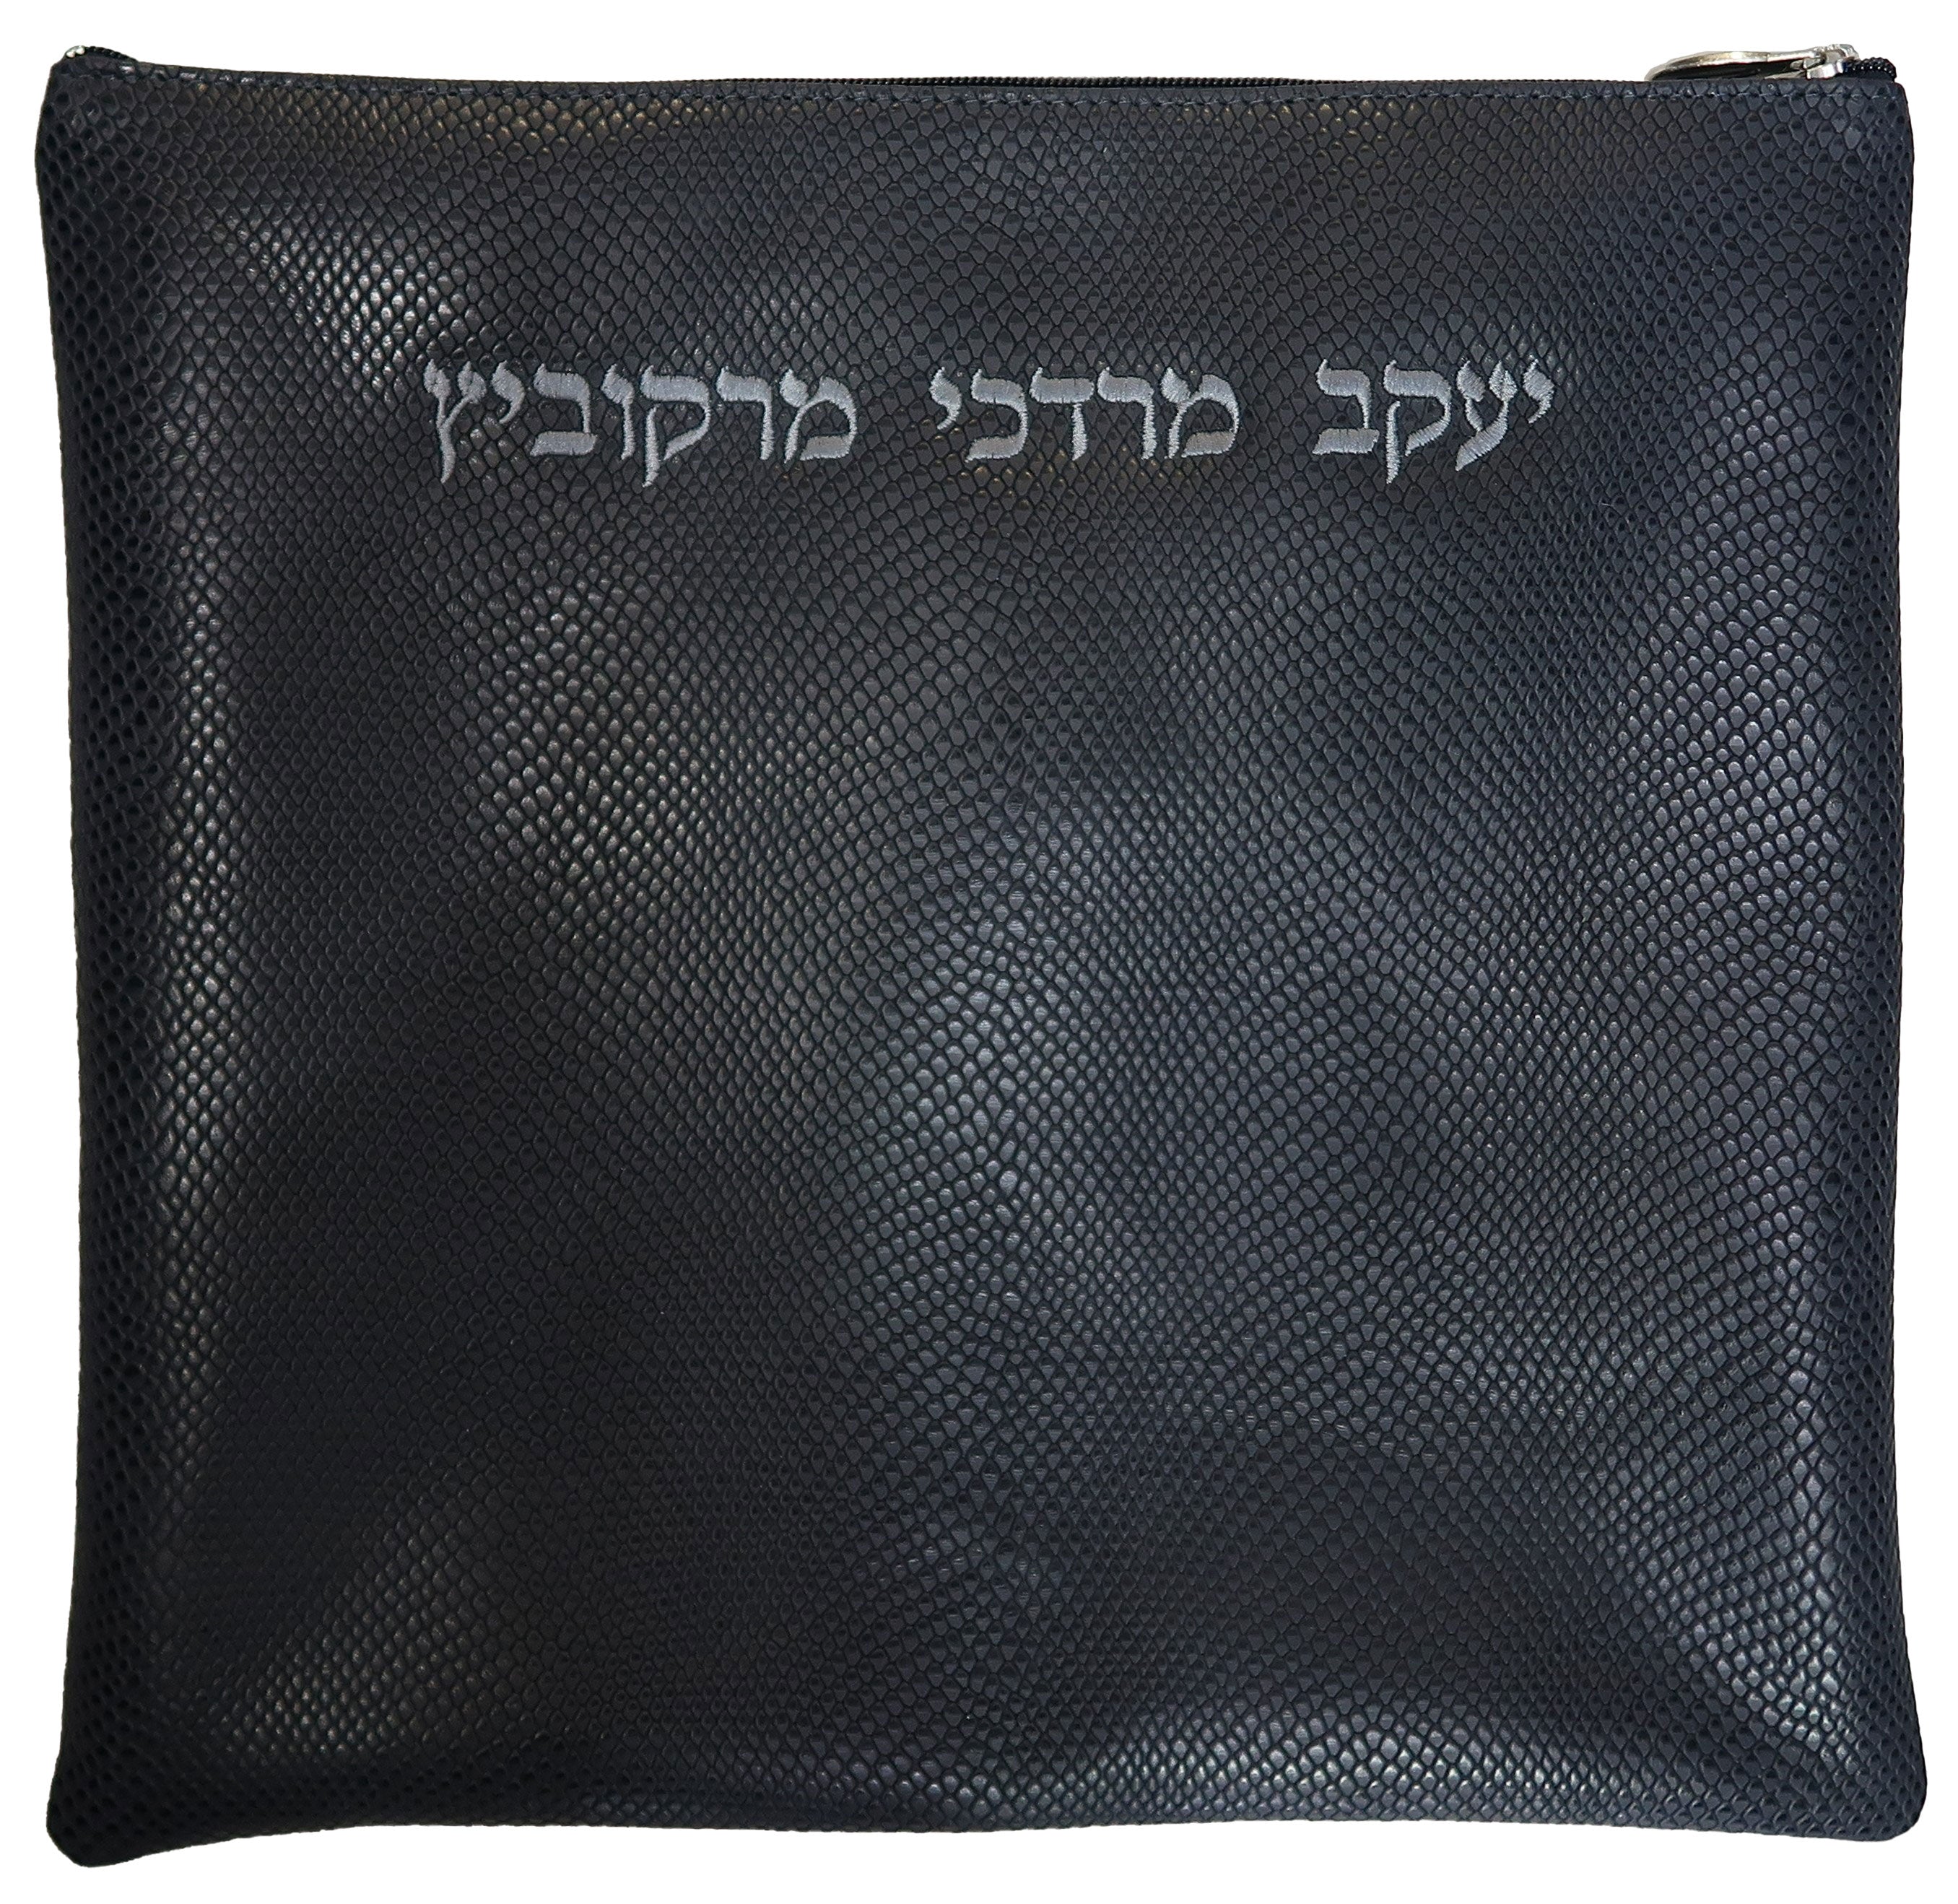 Textured leather tallis and tefilin bag with name embroidery.